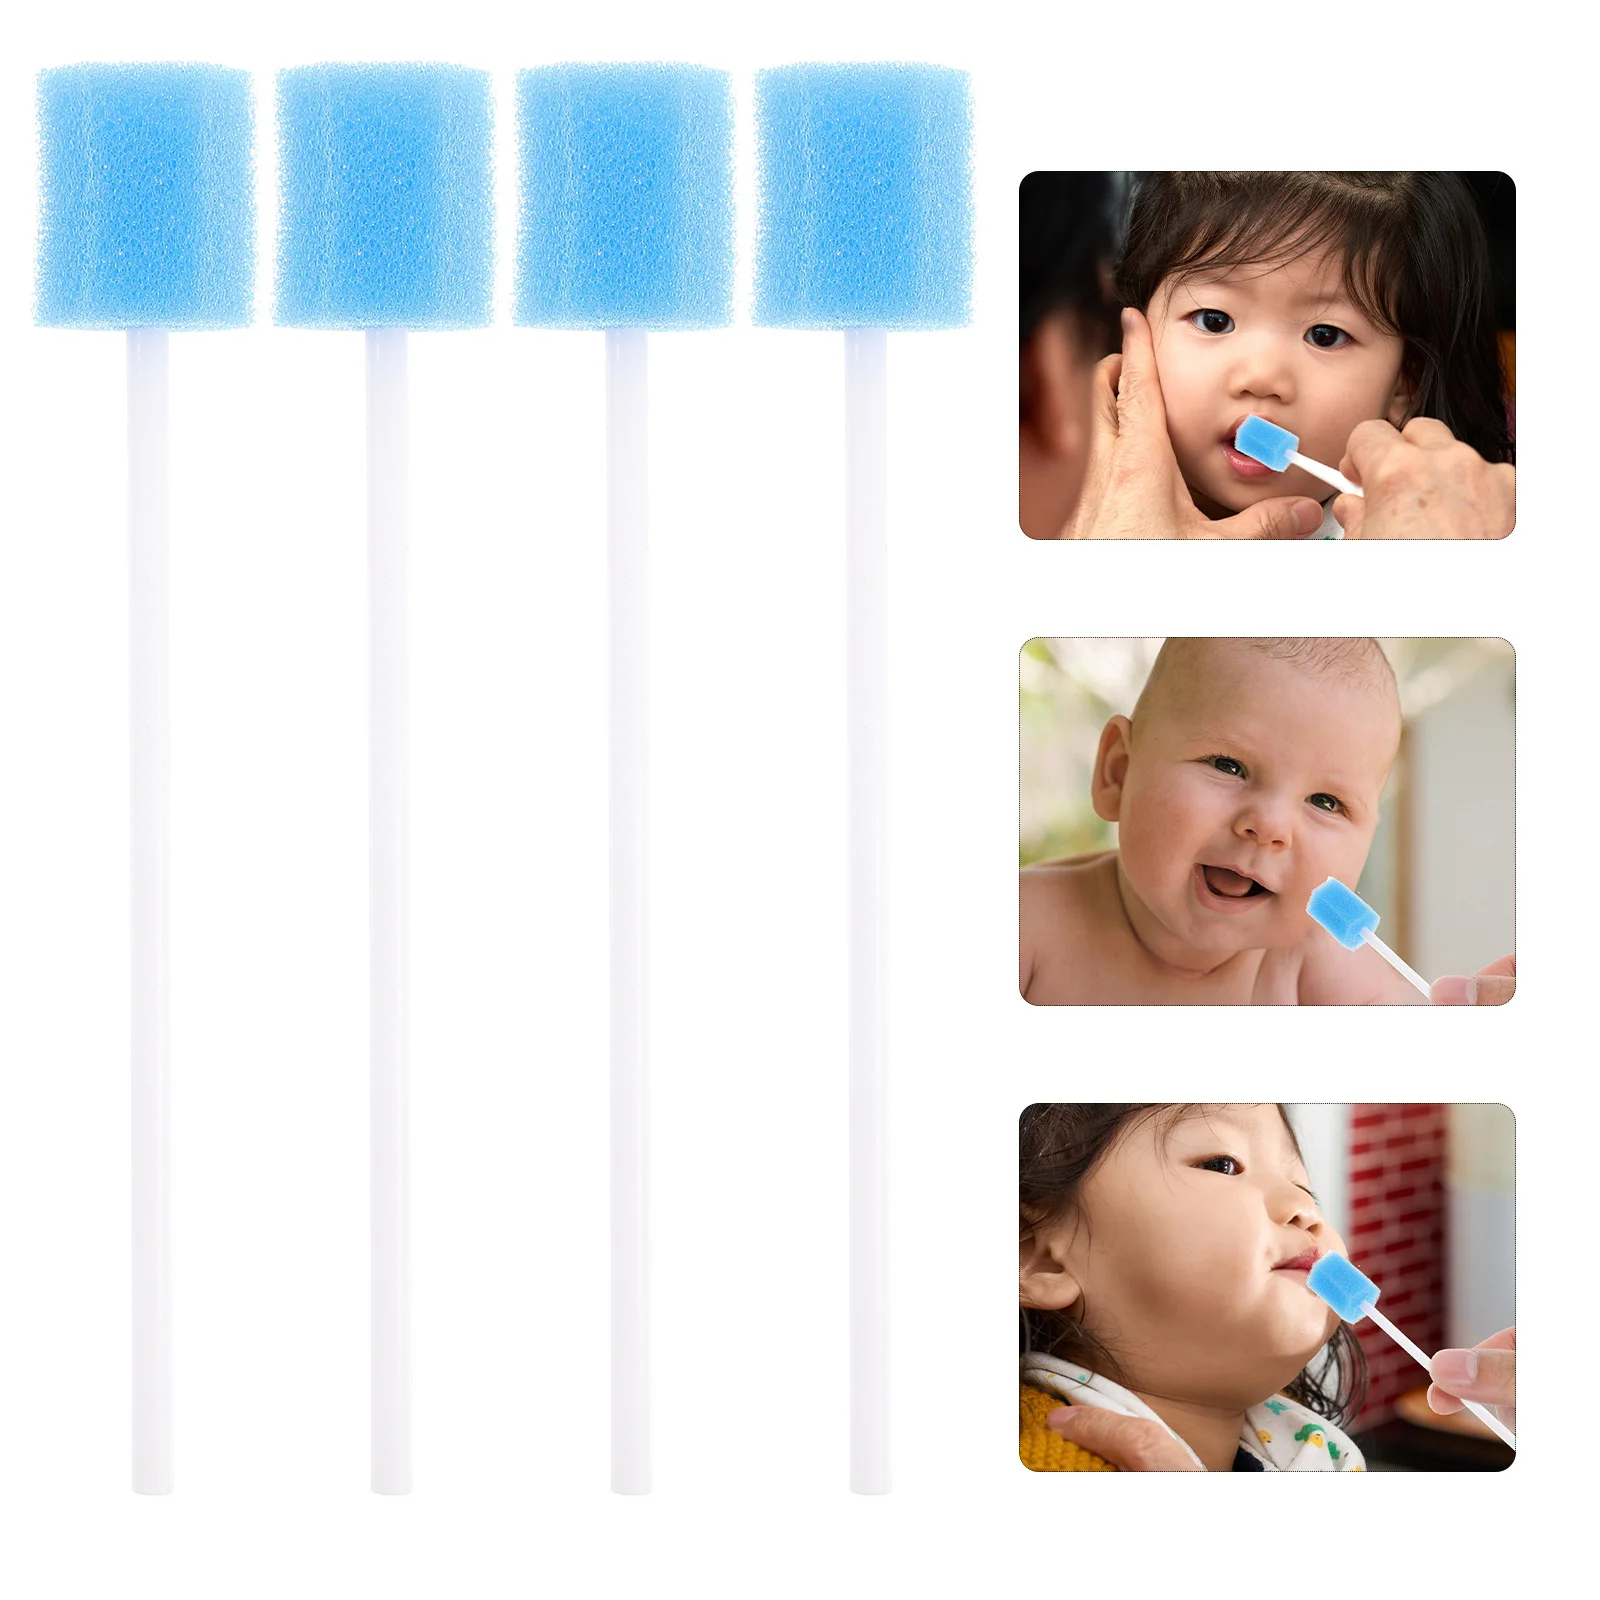 

Healeved Cotton Swabs Cotton Swabs 100 Pcs Mouth Swabs Elderly Disposable Sponges Stick Mouth Care Sponges Tooth Cleaning